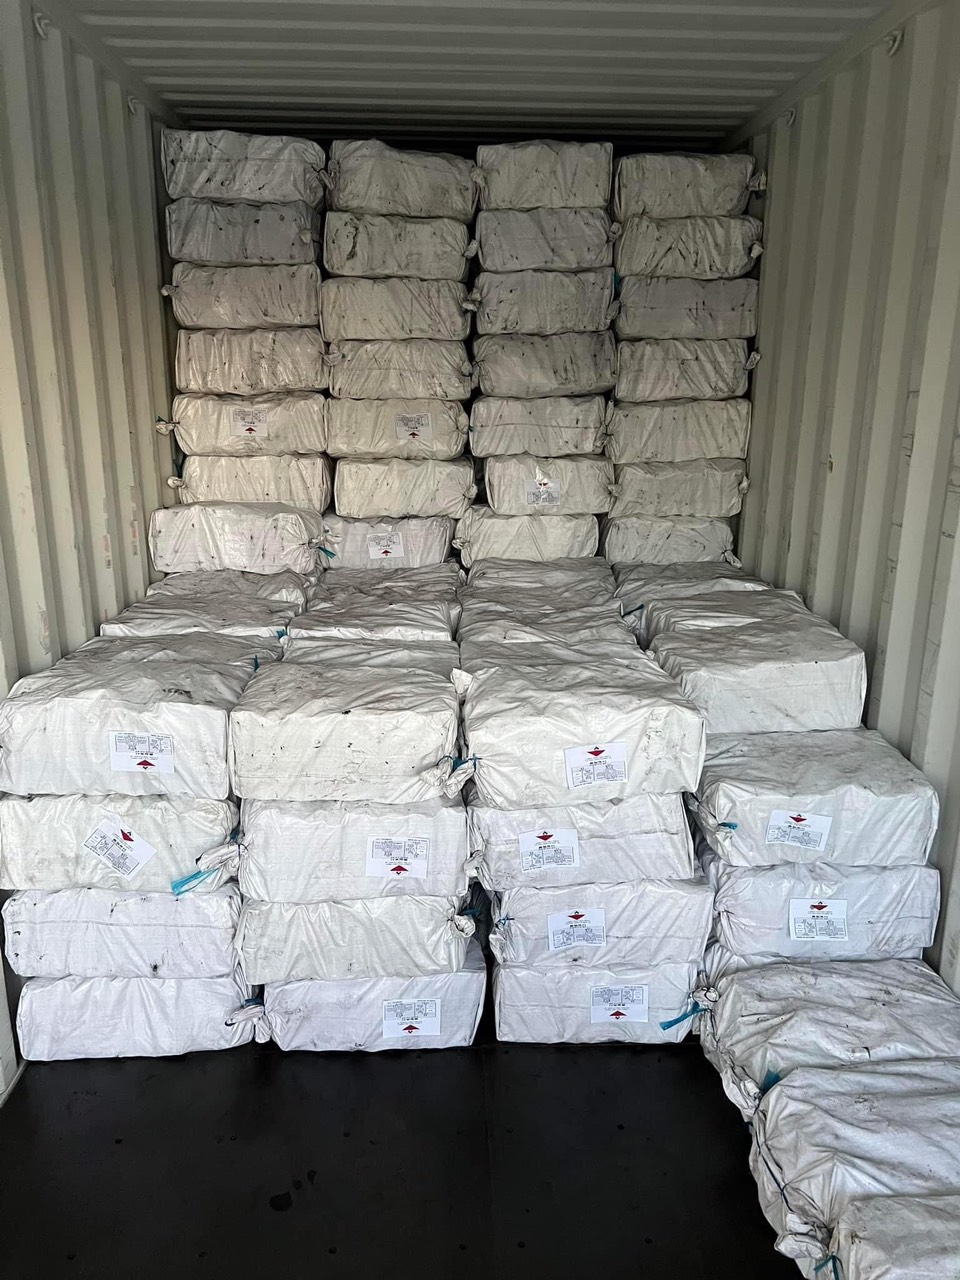 White Charcoal Briquette Reasonable Price & Good Choice Wide Application Using For Many Industries Customized Packing Vietnam 